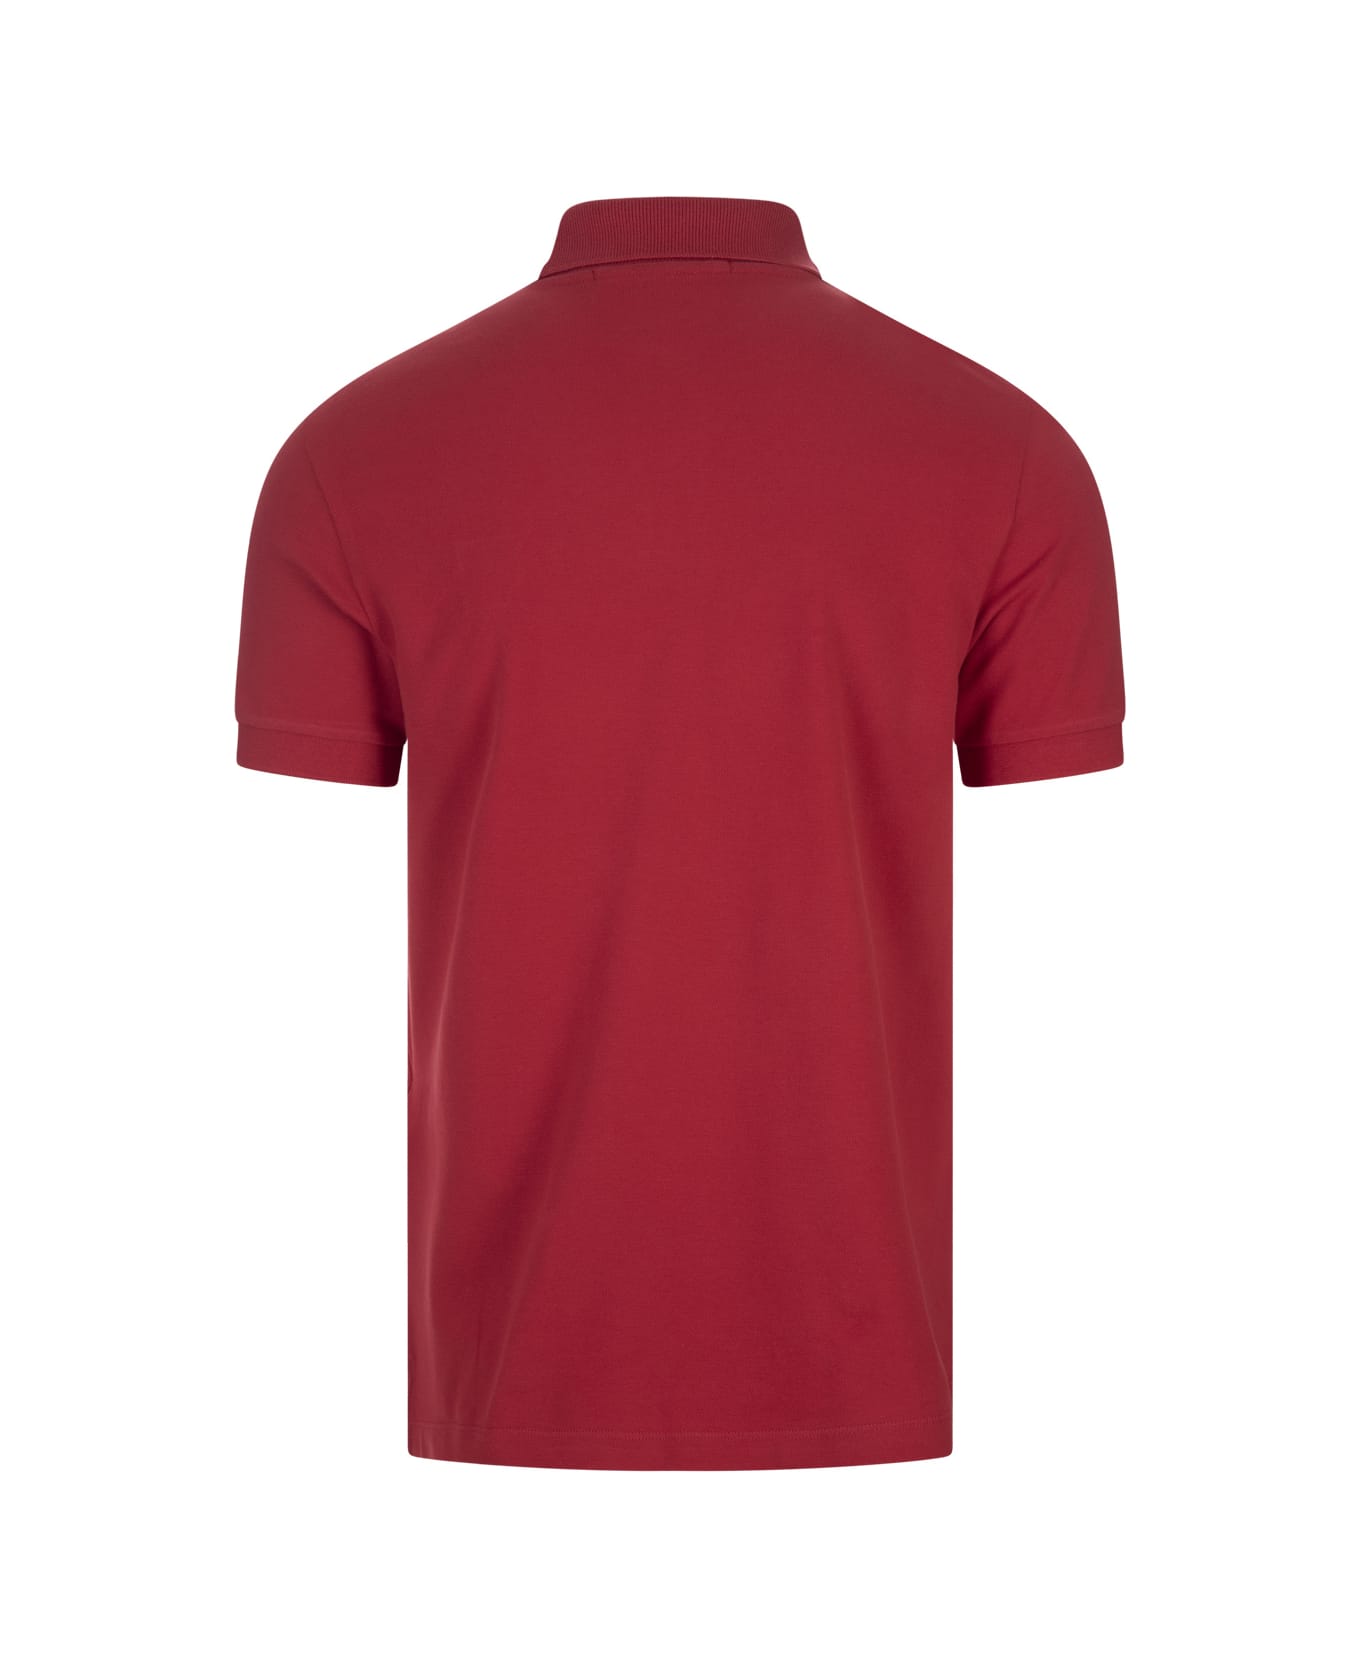 Stone Island Red Piqué Slim Fit Polo Shirt - Red ポロシャツ